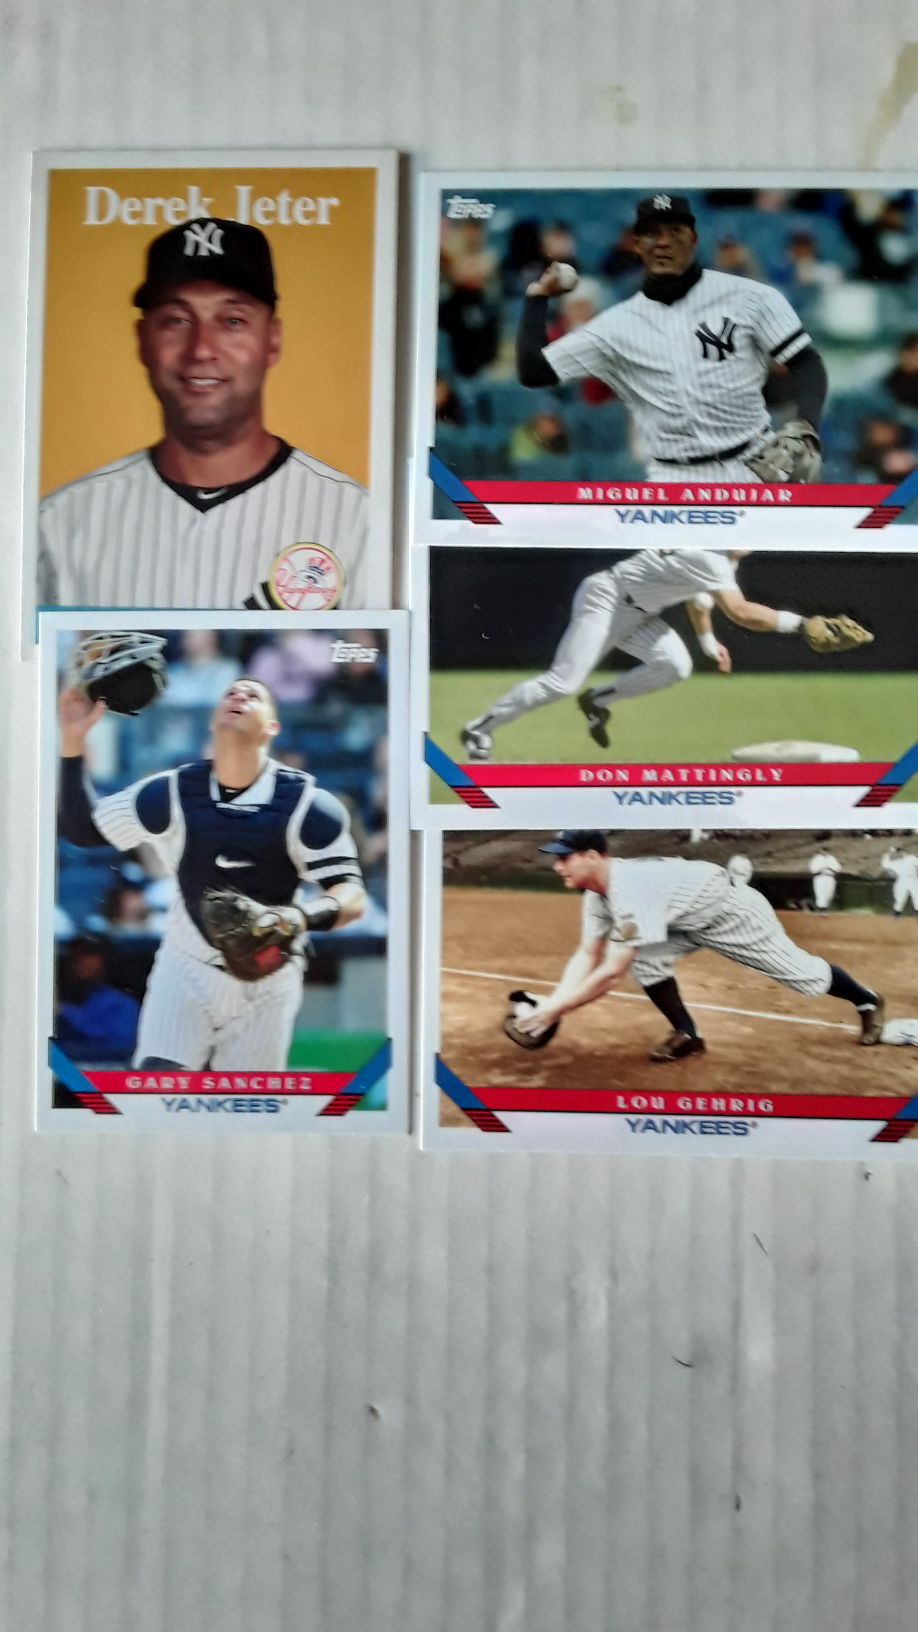 2019 Topps Archive Team cards.